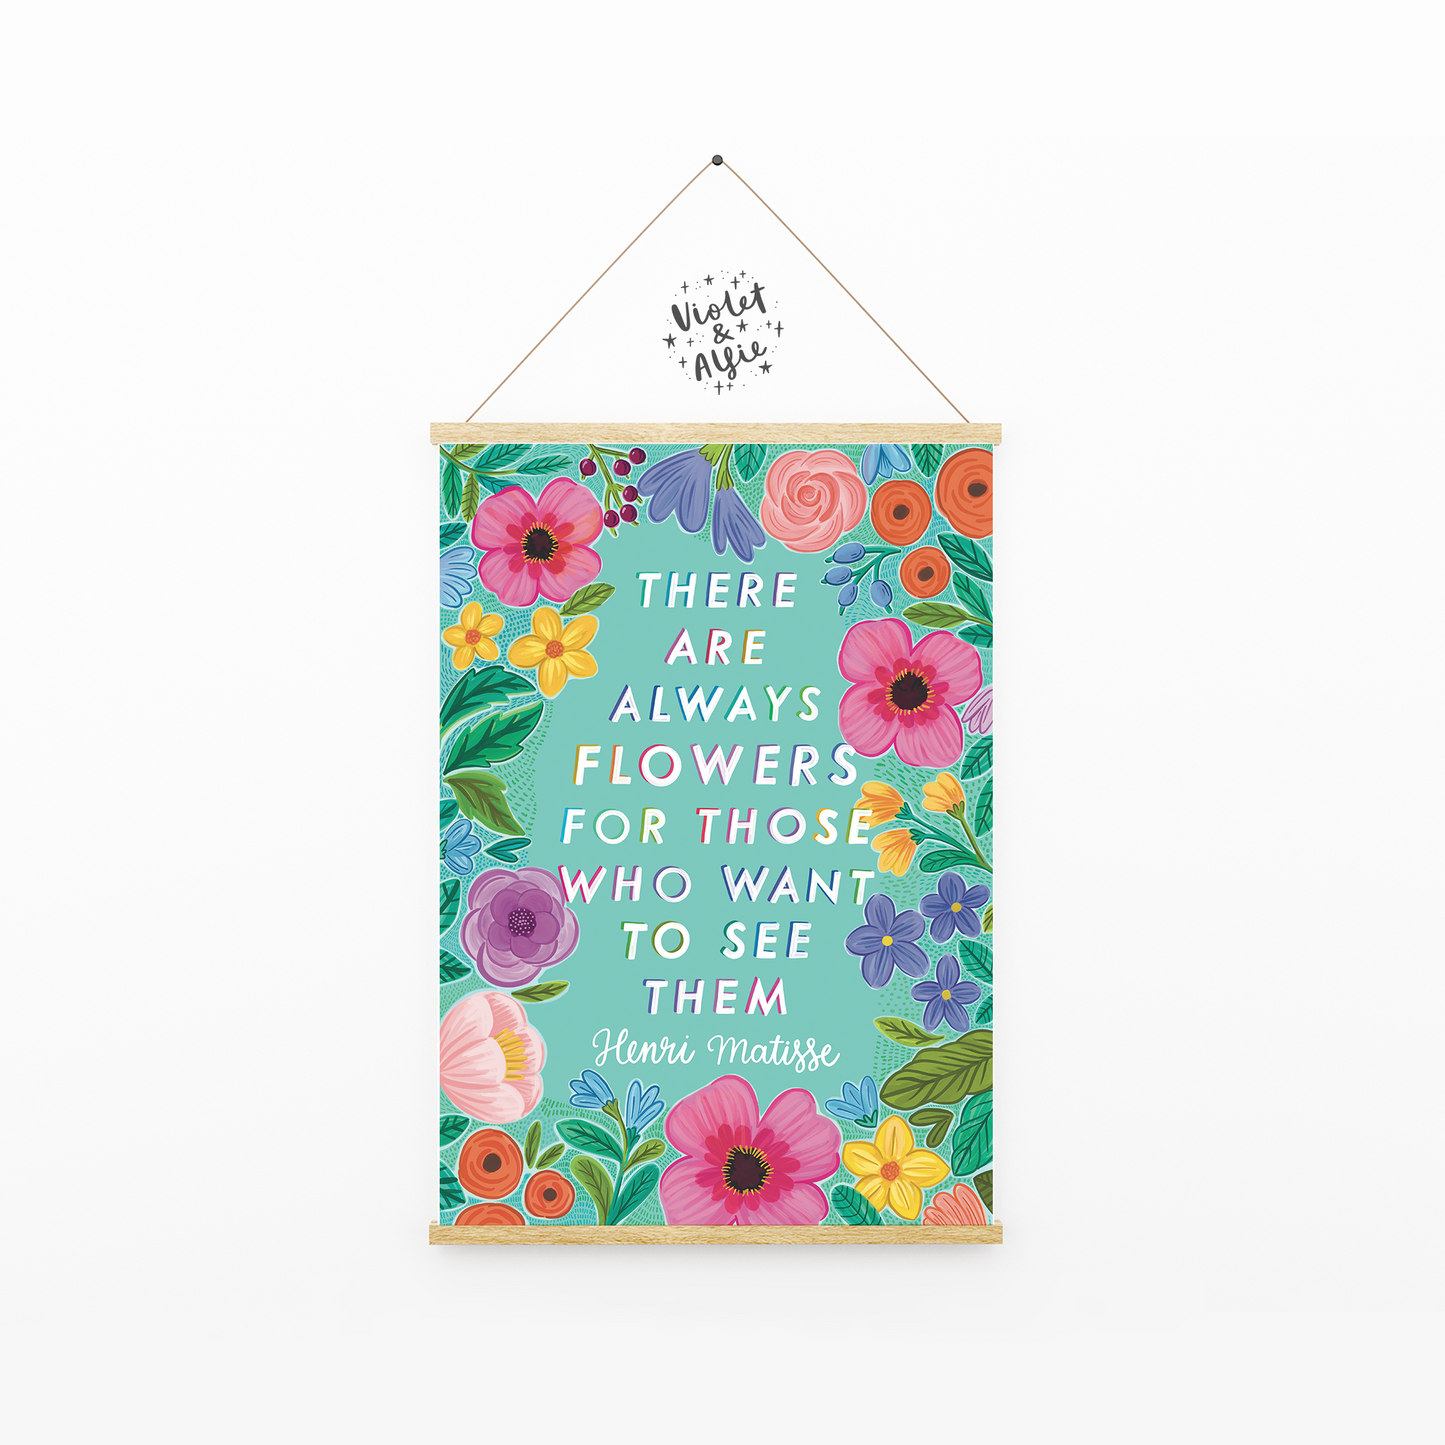 Henri Matisse Quote, there are always flowers for those who wish to see them, flower illustration art, floral wall decor, botanical wall prints, prints for mum, prints for kitchen, colourful wall art, maximalist home decor accessories